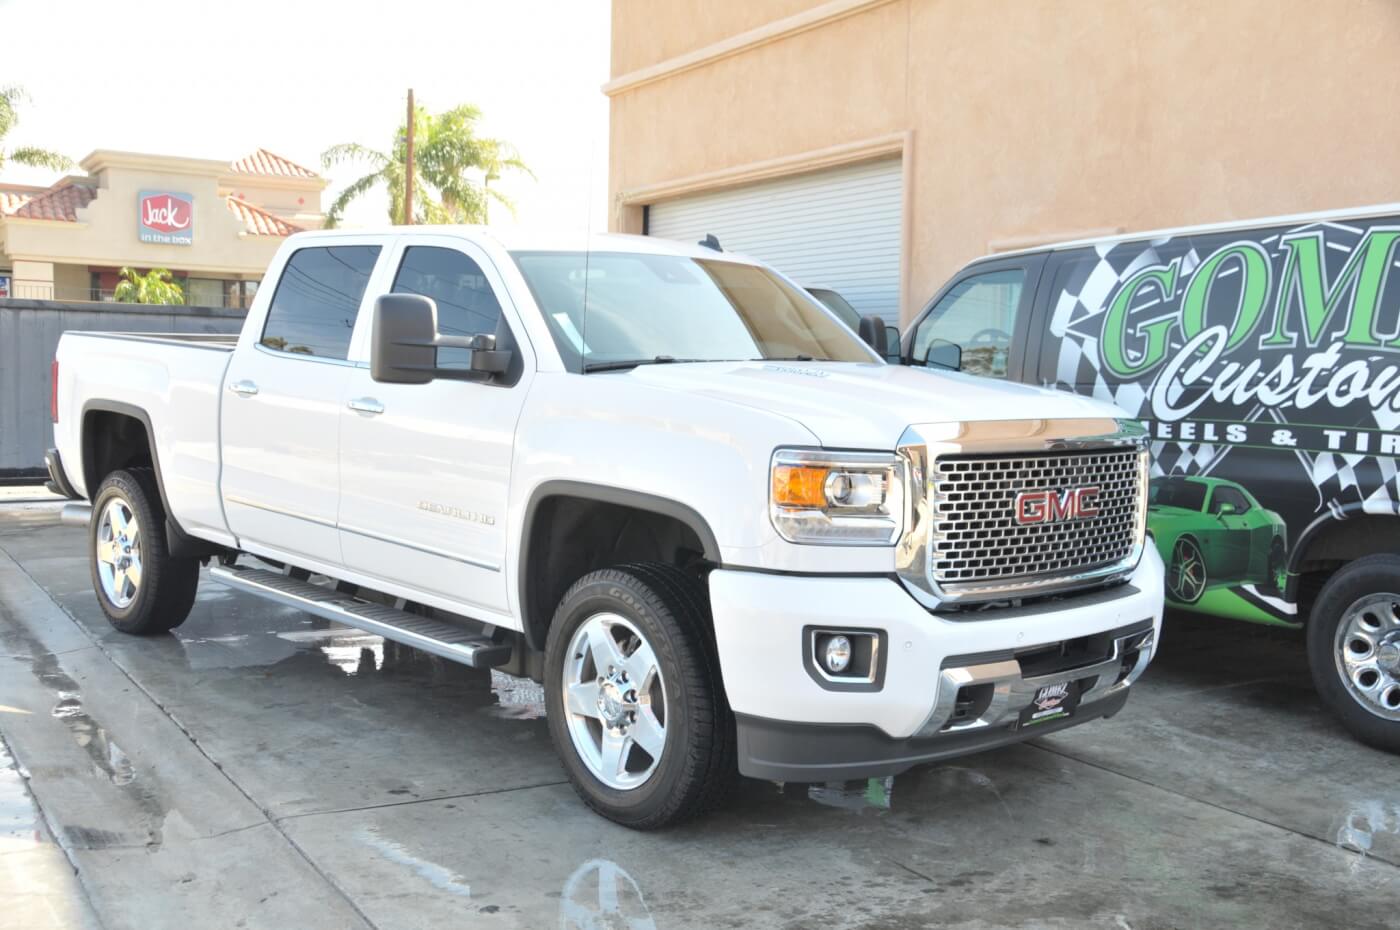 1. Here’s the bone-stock 2015 GMC before installation of the lift kit.